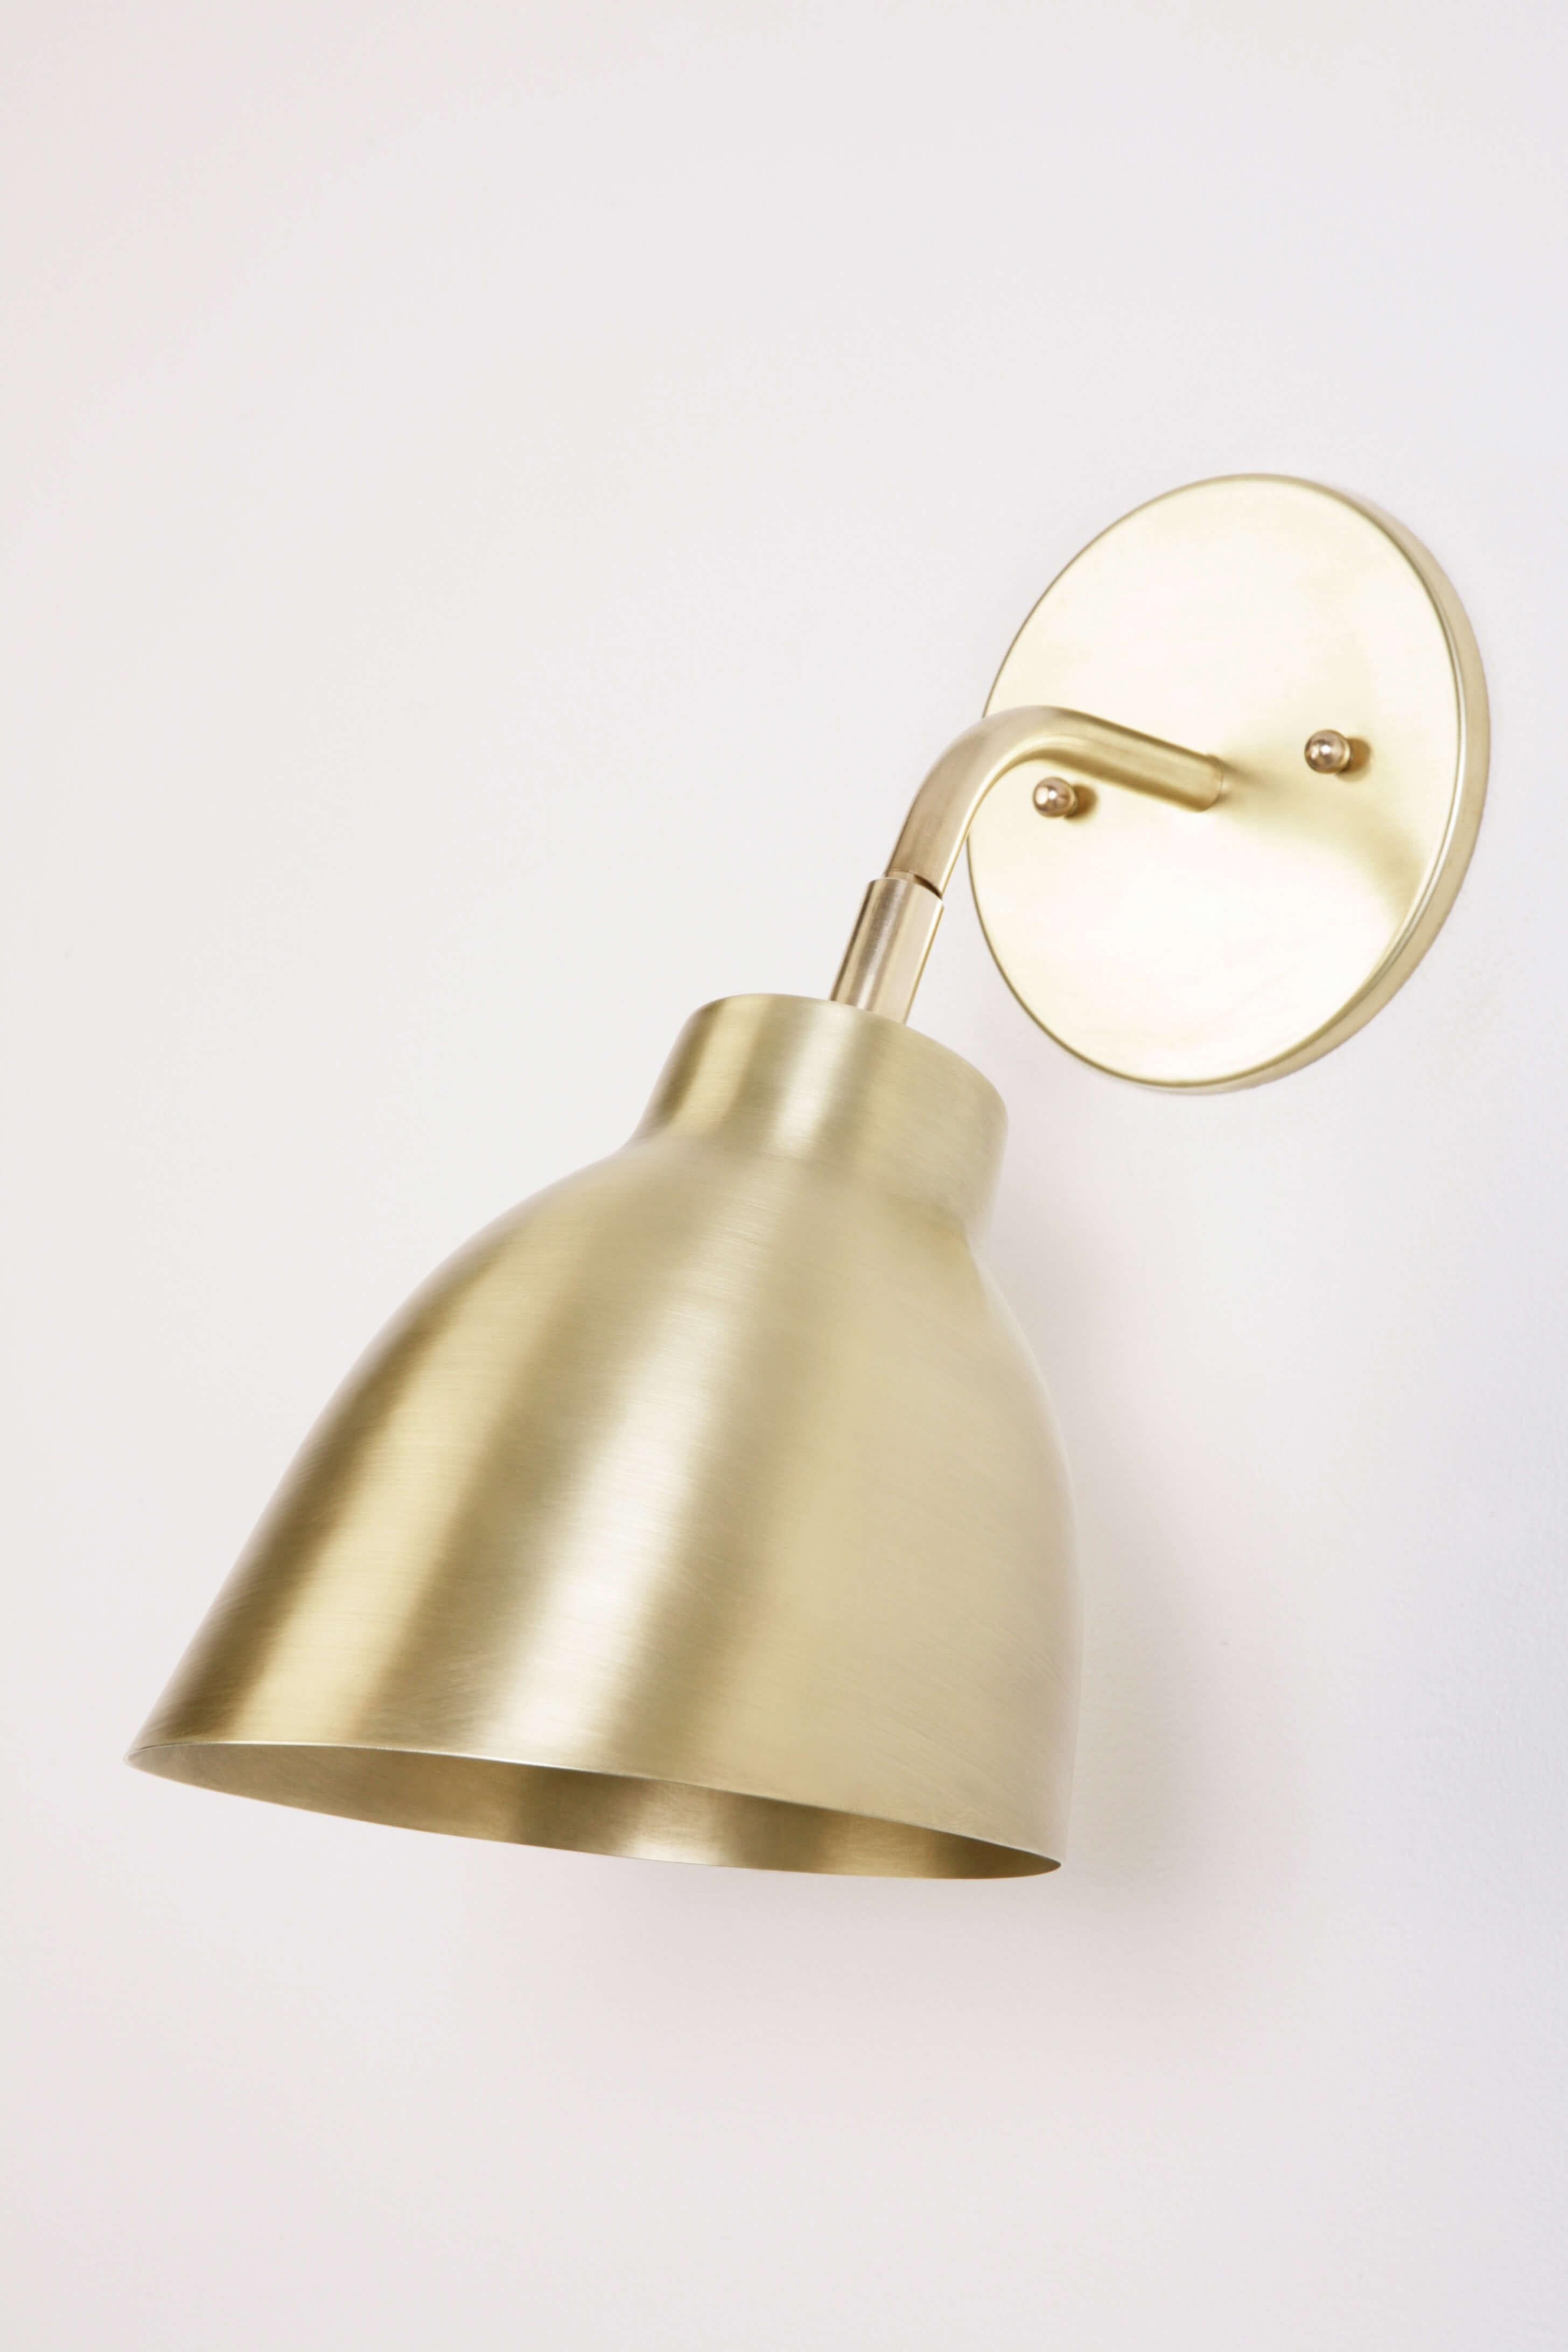 The Navire petite sconce is part of Atelier de Troupe's Classic Navire collection inspired by nautical lamps from the 1930s. It has a solid brass arm and up and down tilting shade. The sconce is hardwired and equipped with a 60W medium base